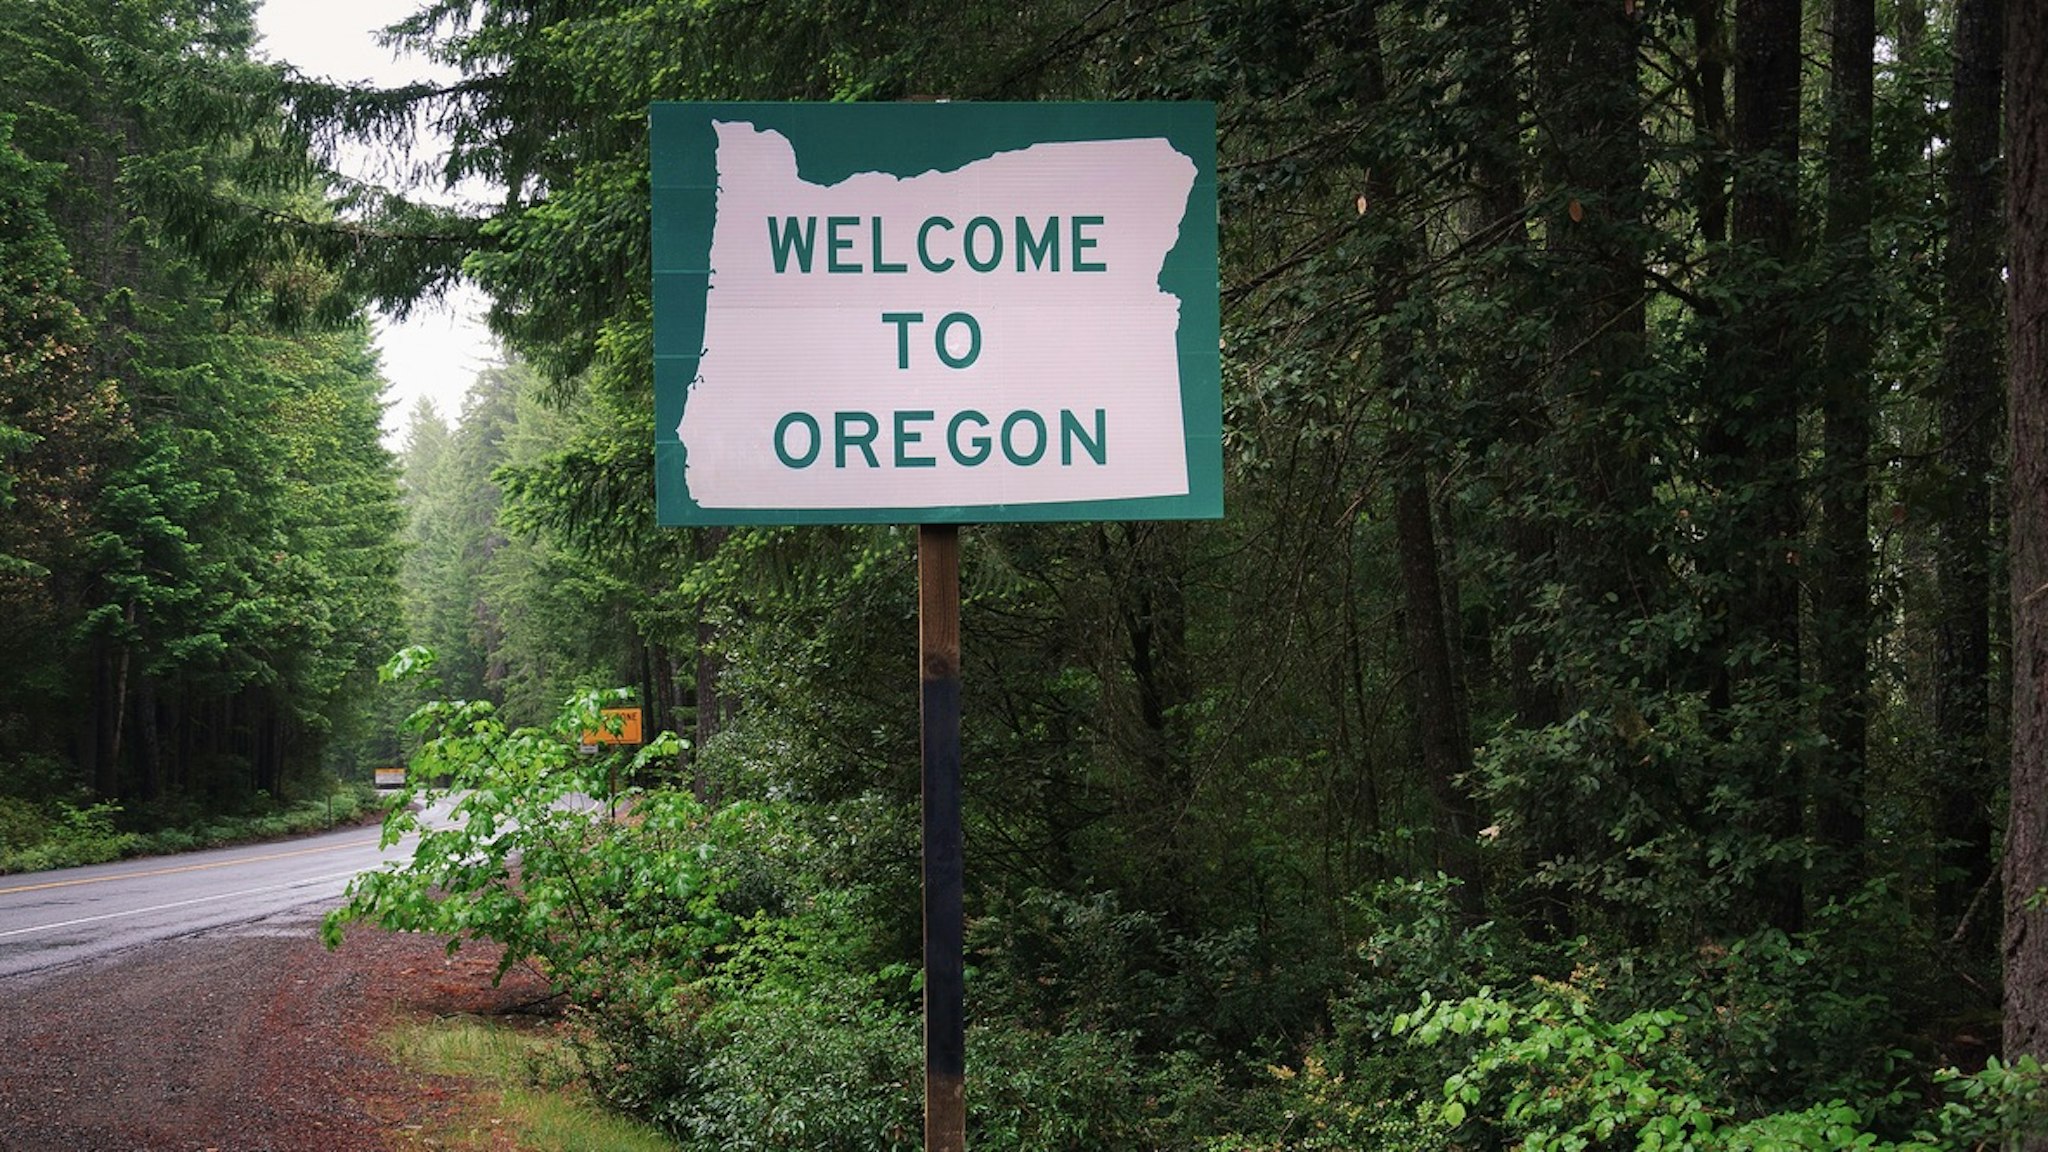 Welcome to Oregon State Sign - stock photo Welcome to Oregon State Sign on US-199 also called the Redwood Highway miroslav_1 via Getty Images